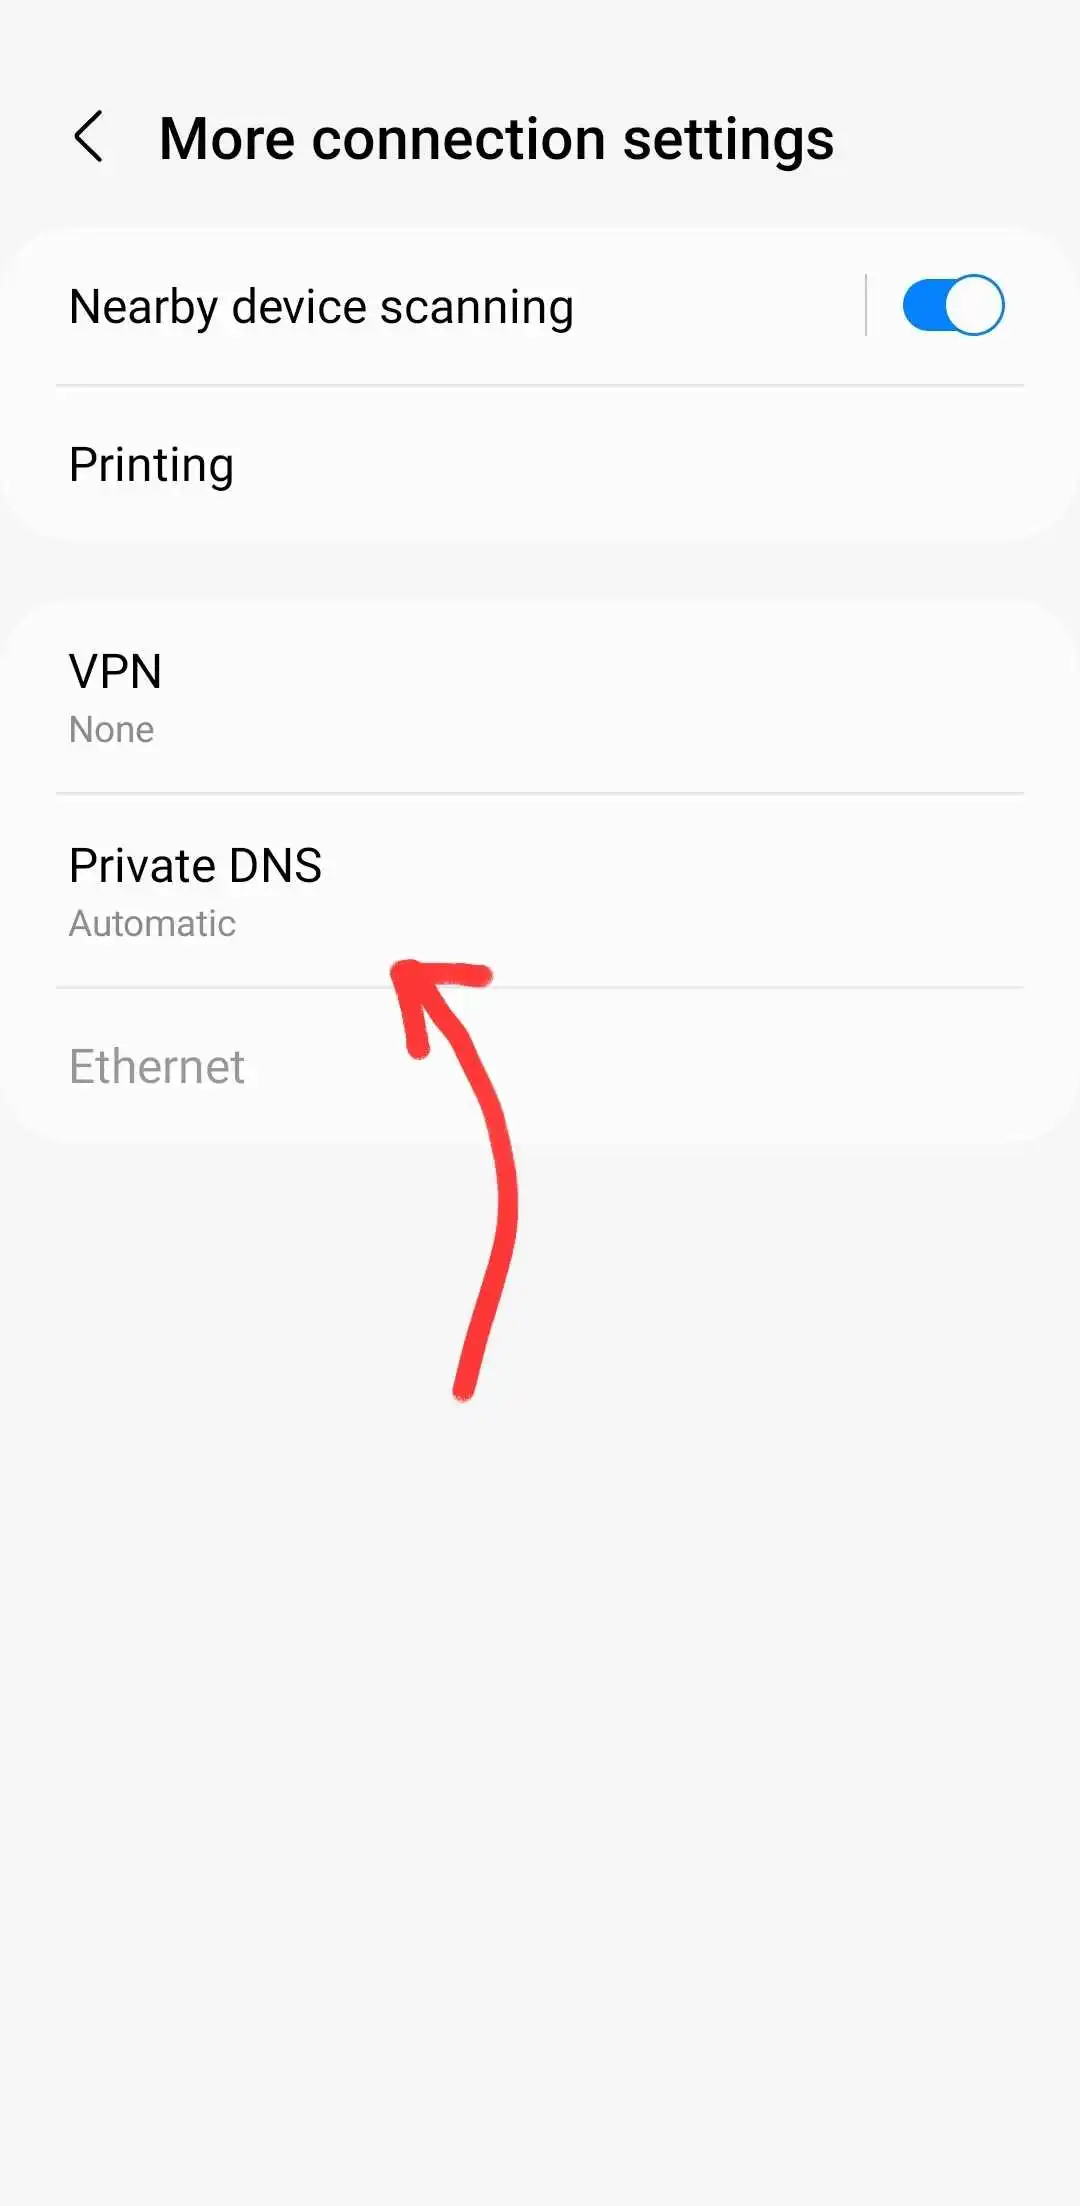 private dns option in more connection settings